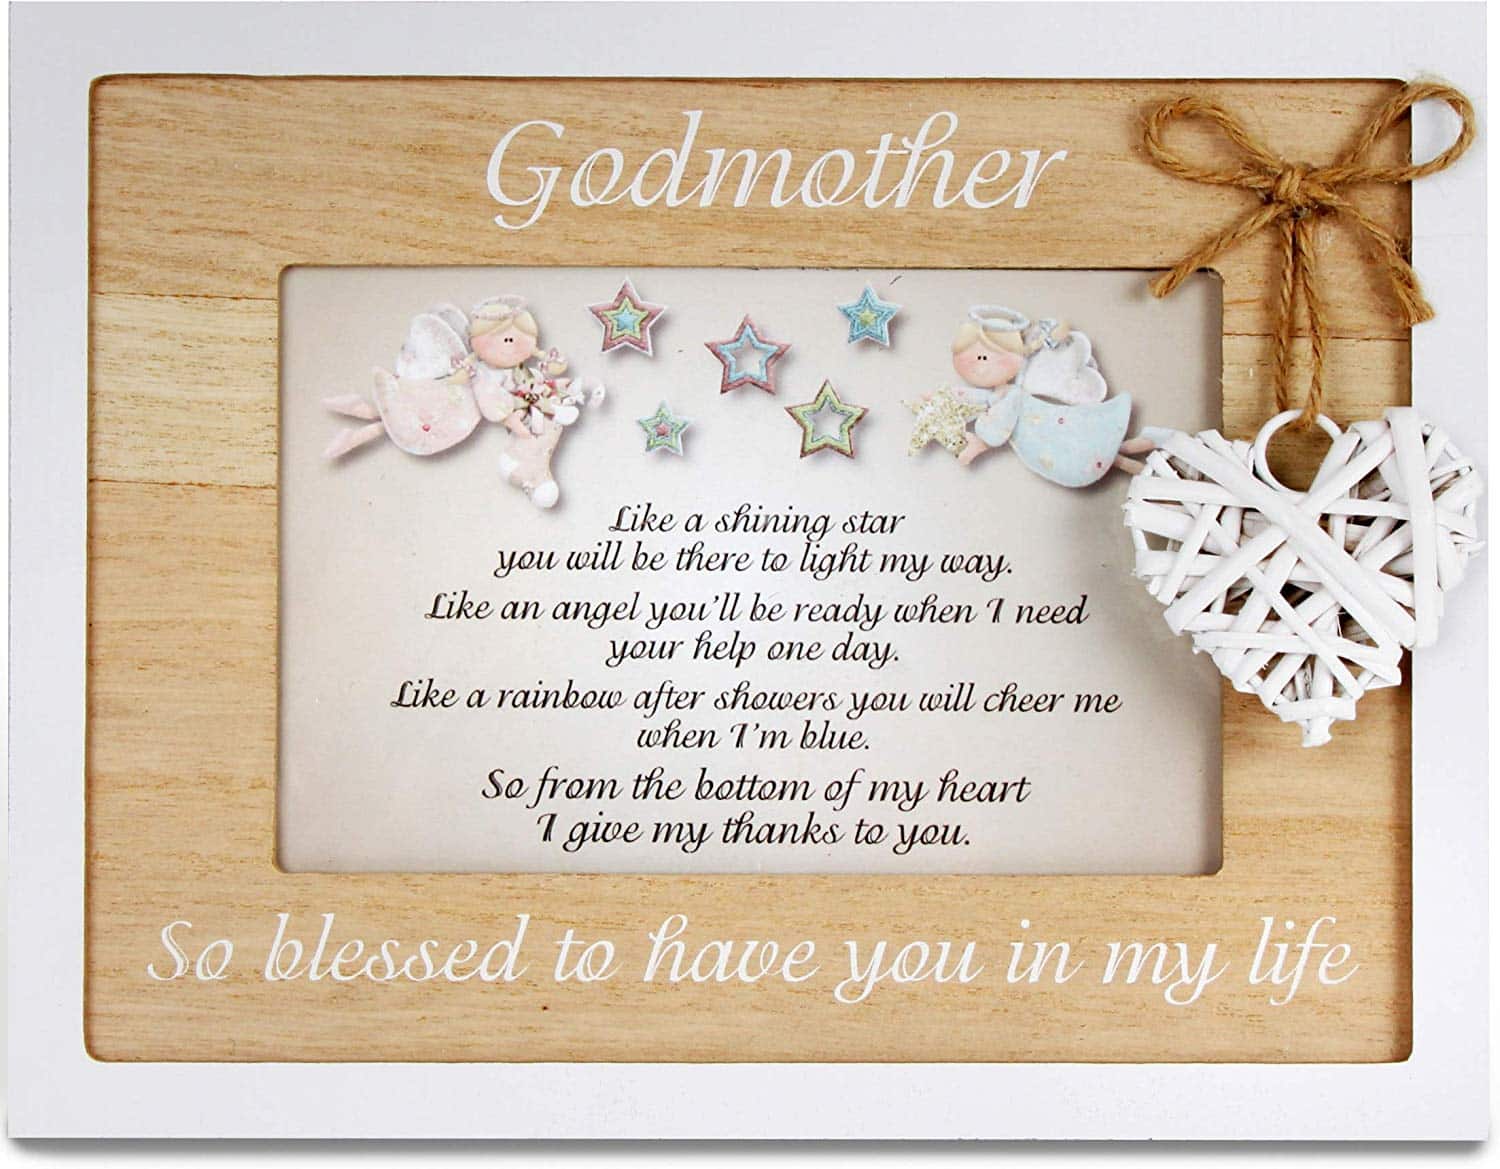 Best Godmother Gifts 2022: Traditional Godmother Picture Frame 2022